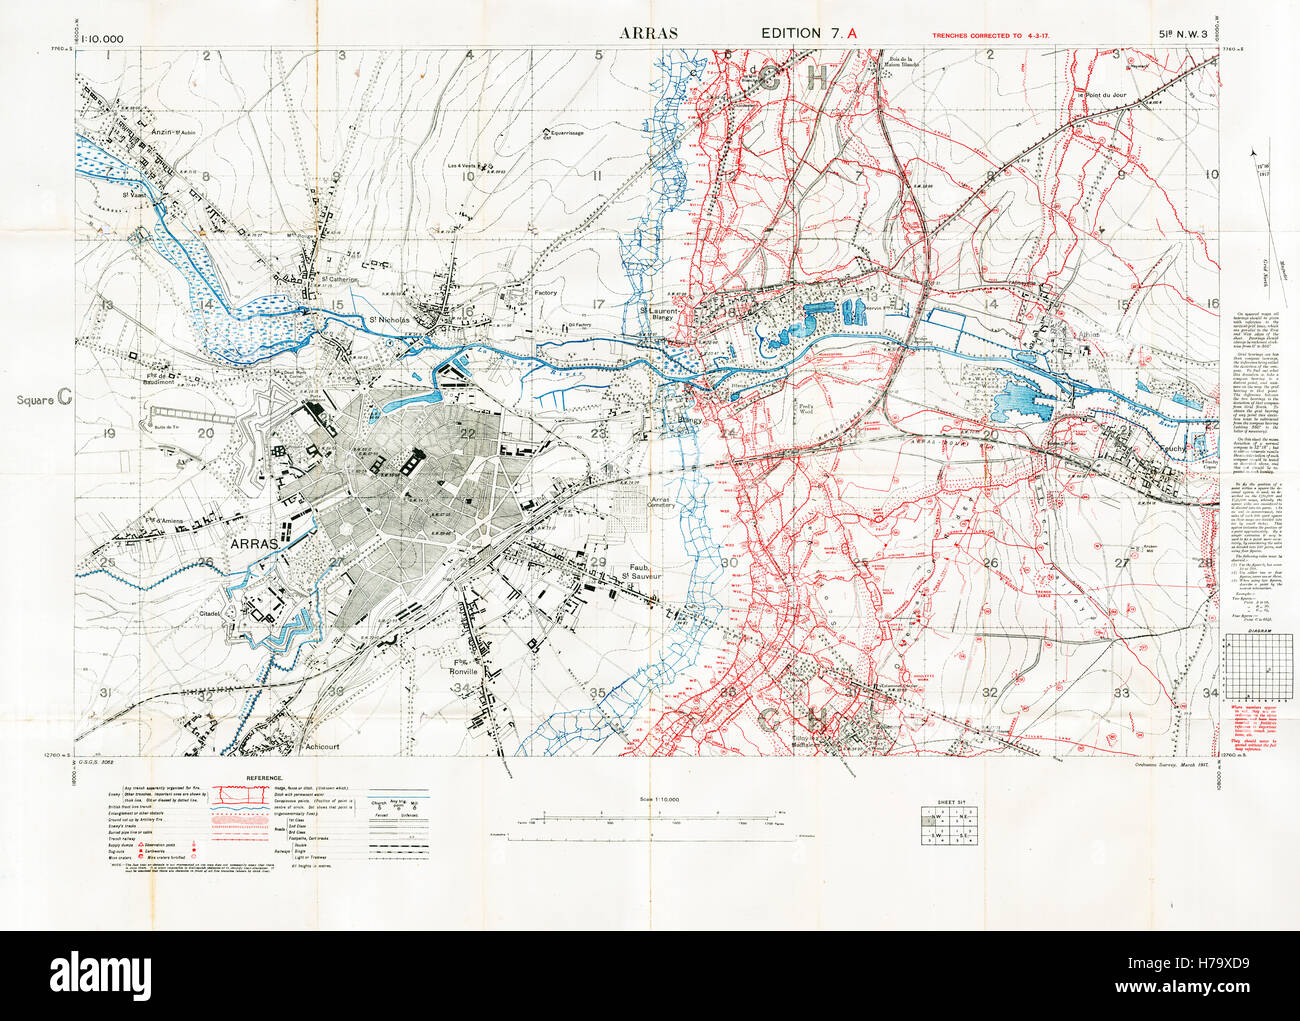 Arras Sector Battlefield Map, 1917 Edition 7A 1:10,000 military map of the British sector in Northern France, with square 51B NW3, trenches correct at March 1917 Stock Photo